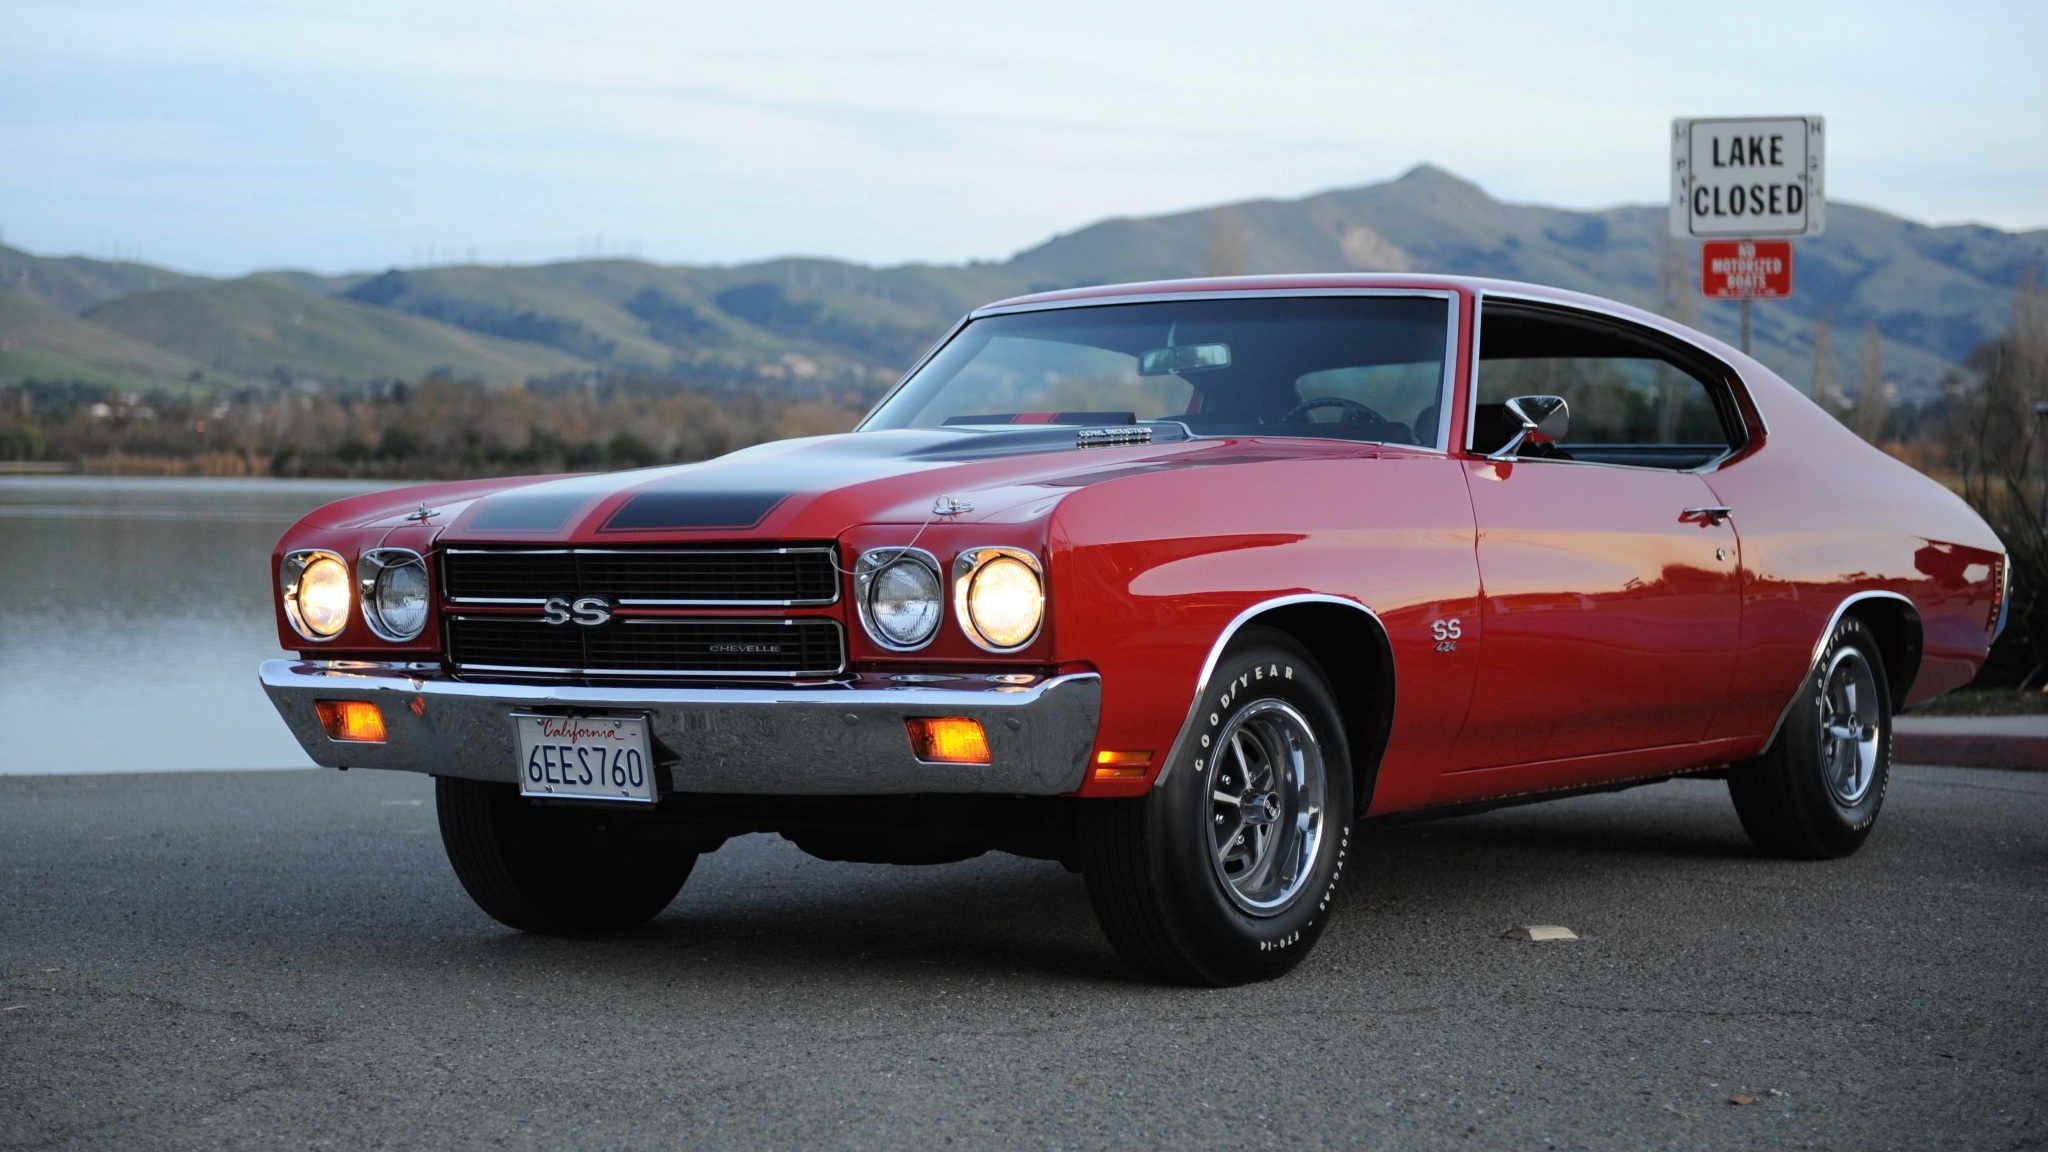 Download wallpaper 2048x1152 chevrolet chevelle ss red 454